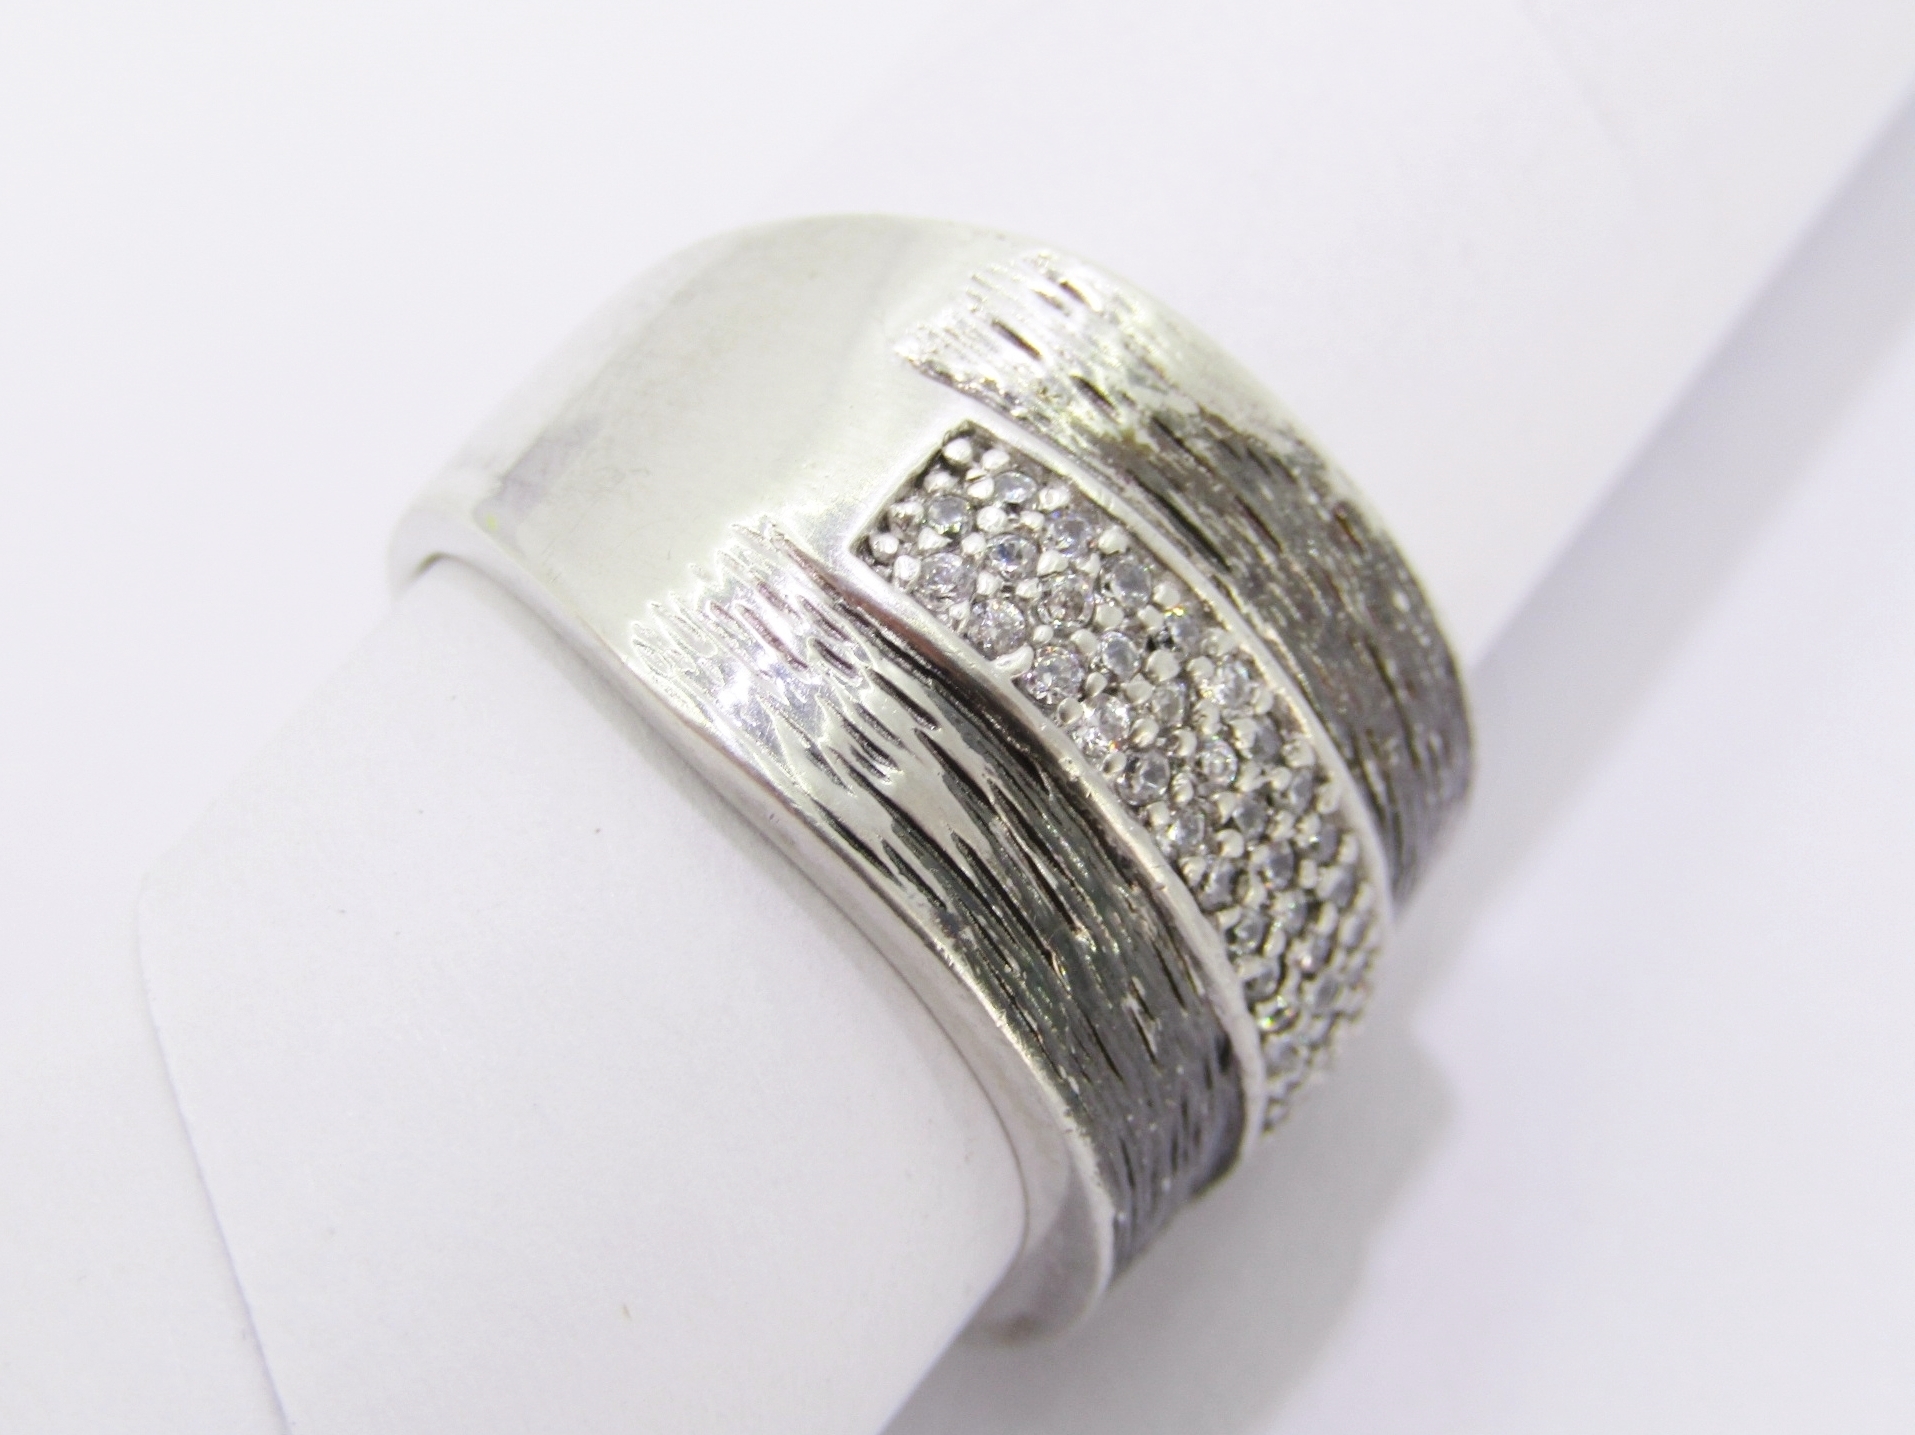 A Stunning Broad Textured Ring With Zirconia’s in Sterling Silver.